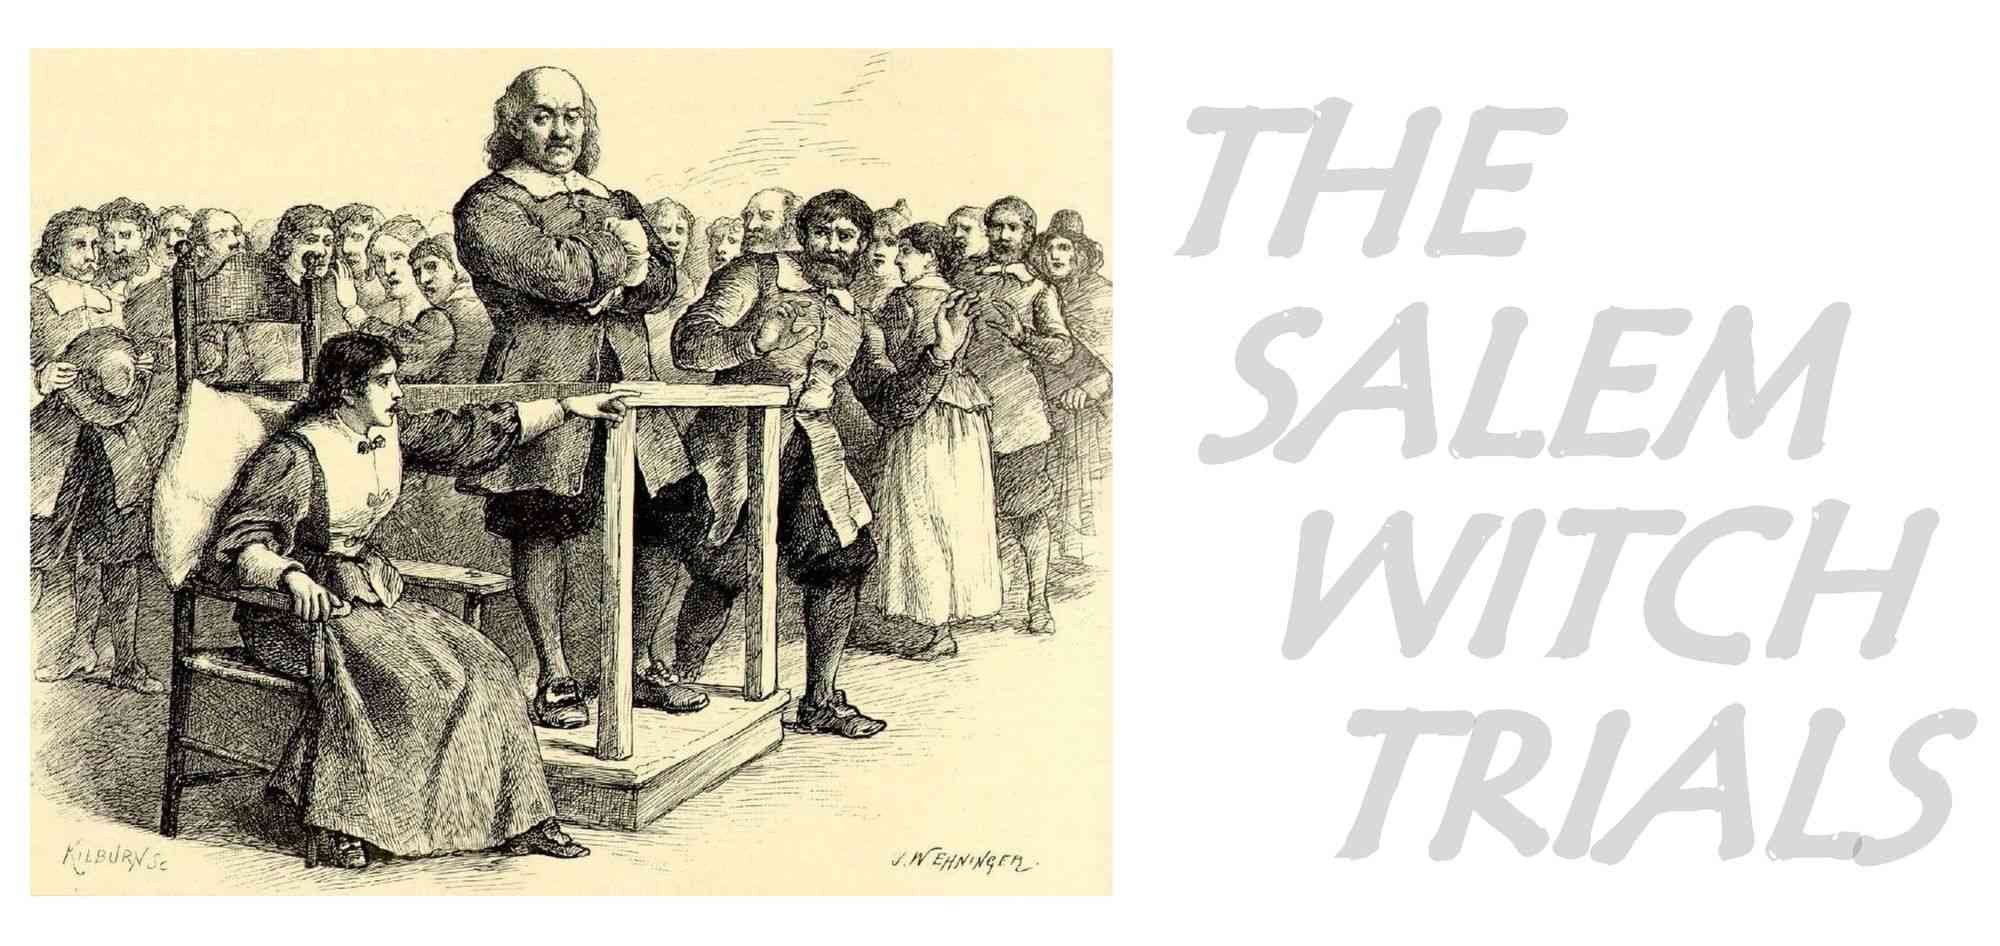 Salem Witch Trials: A Cautionary Tale of Public Hysteria and Scapegoating